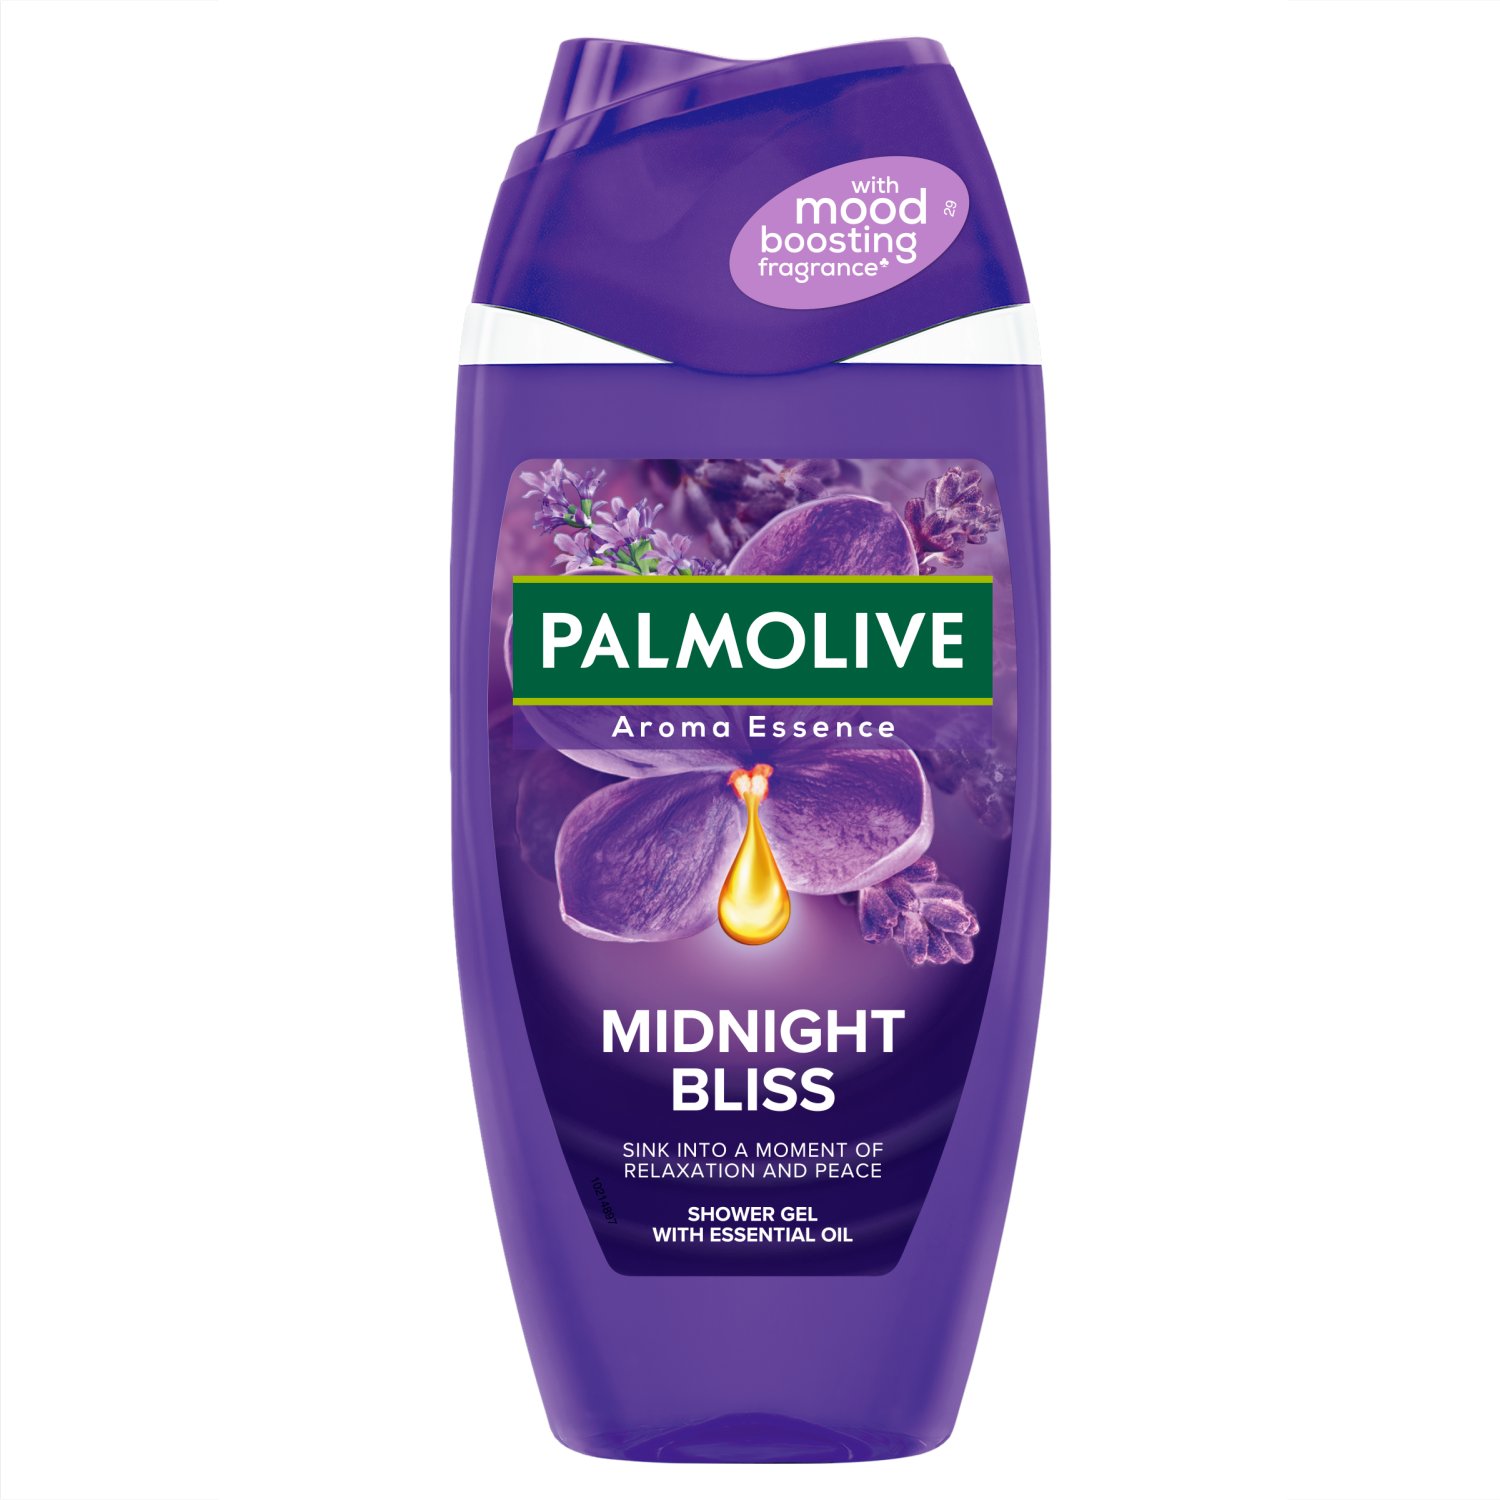 Palmolive Aroma Essence  Midnight Bliss Shower Gel created with mood boosting fragrance technology to enhance calm and relaxation in every shower